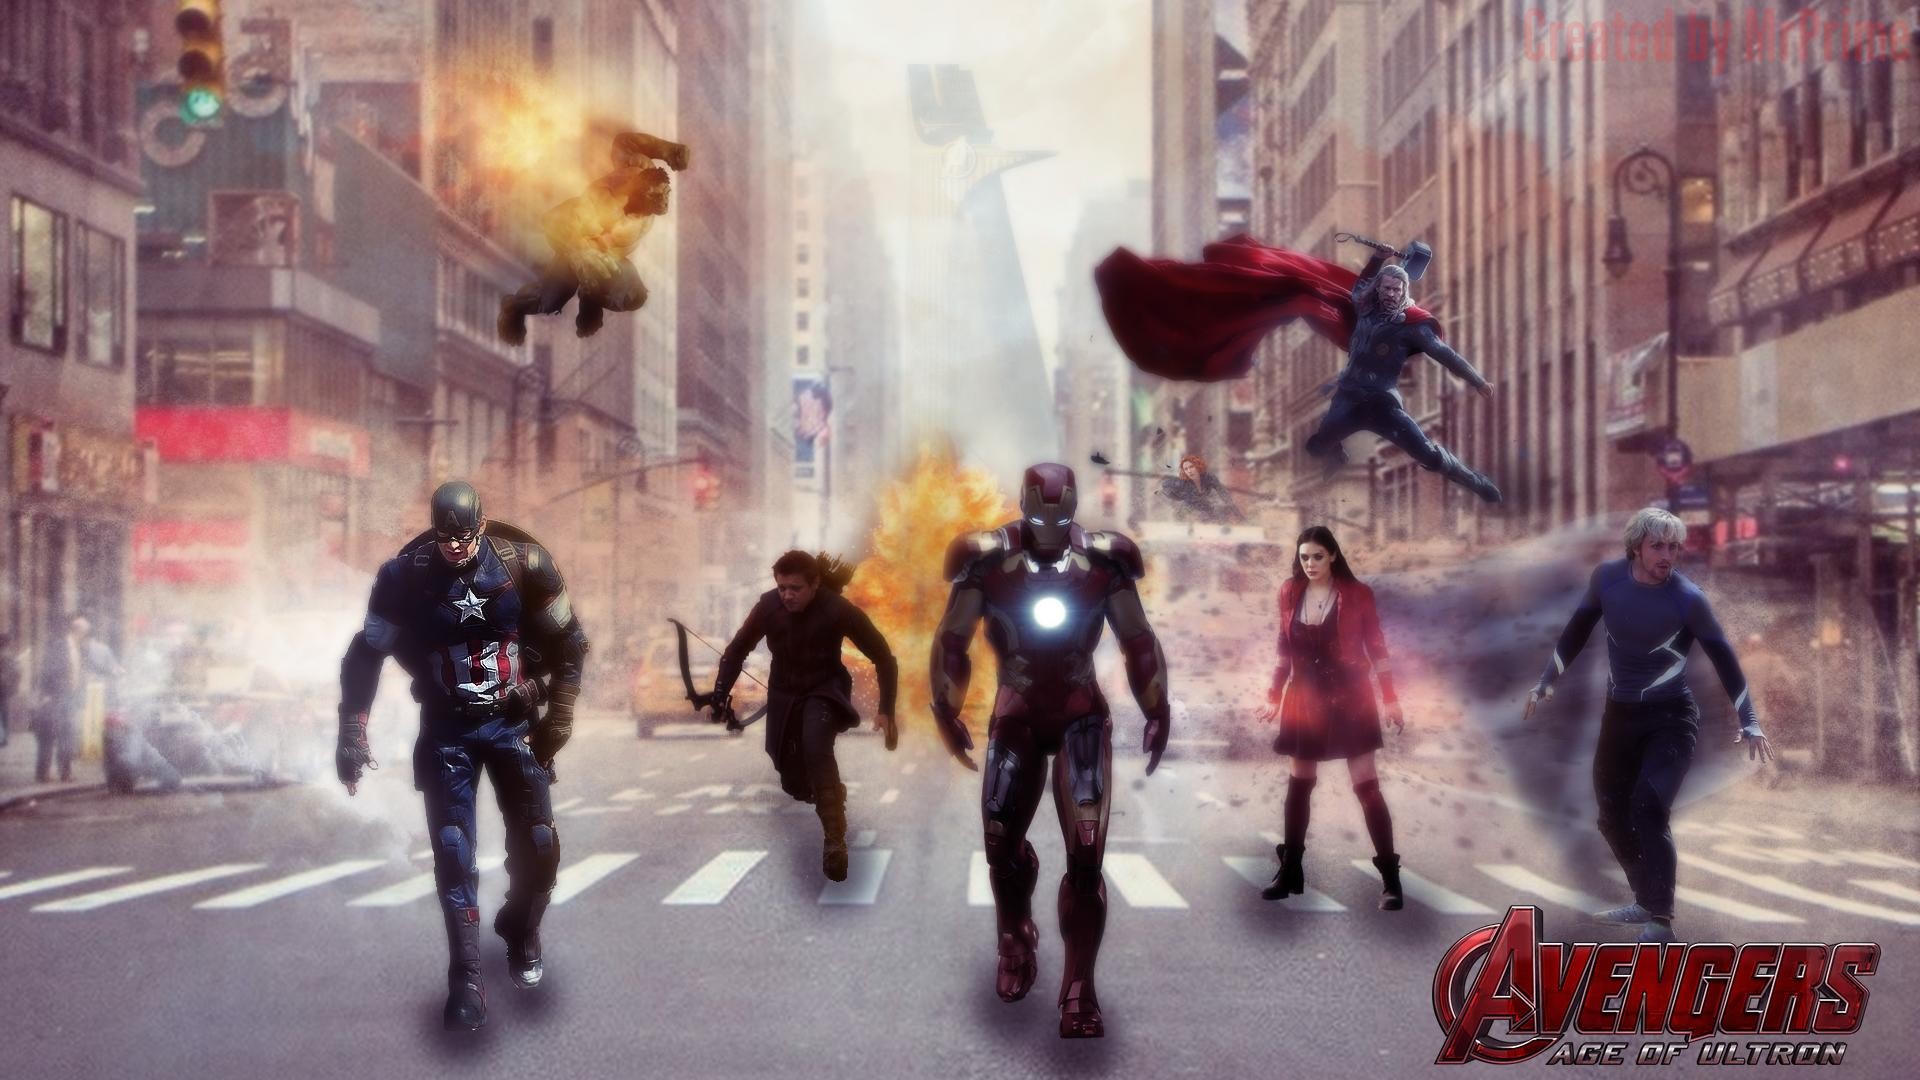 1920x1080 Avengers Age Of Ultron Wallpapers High Quality Resolution